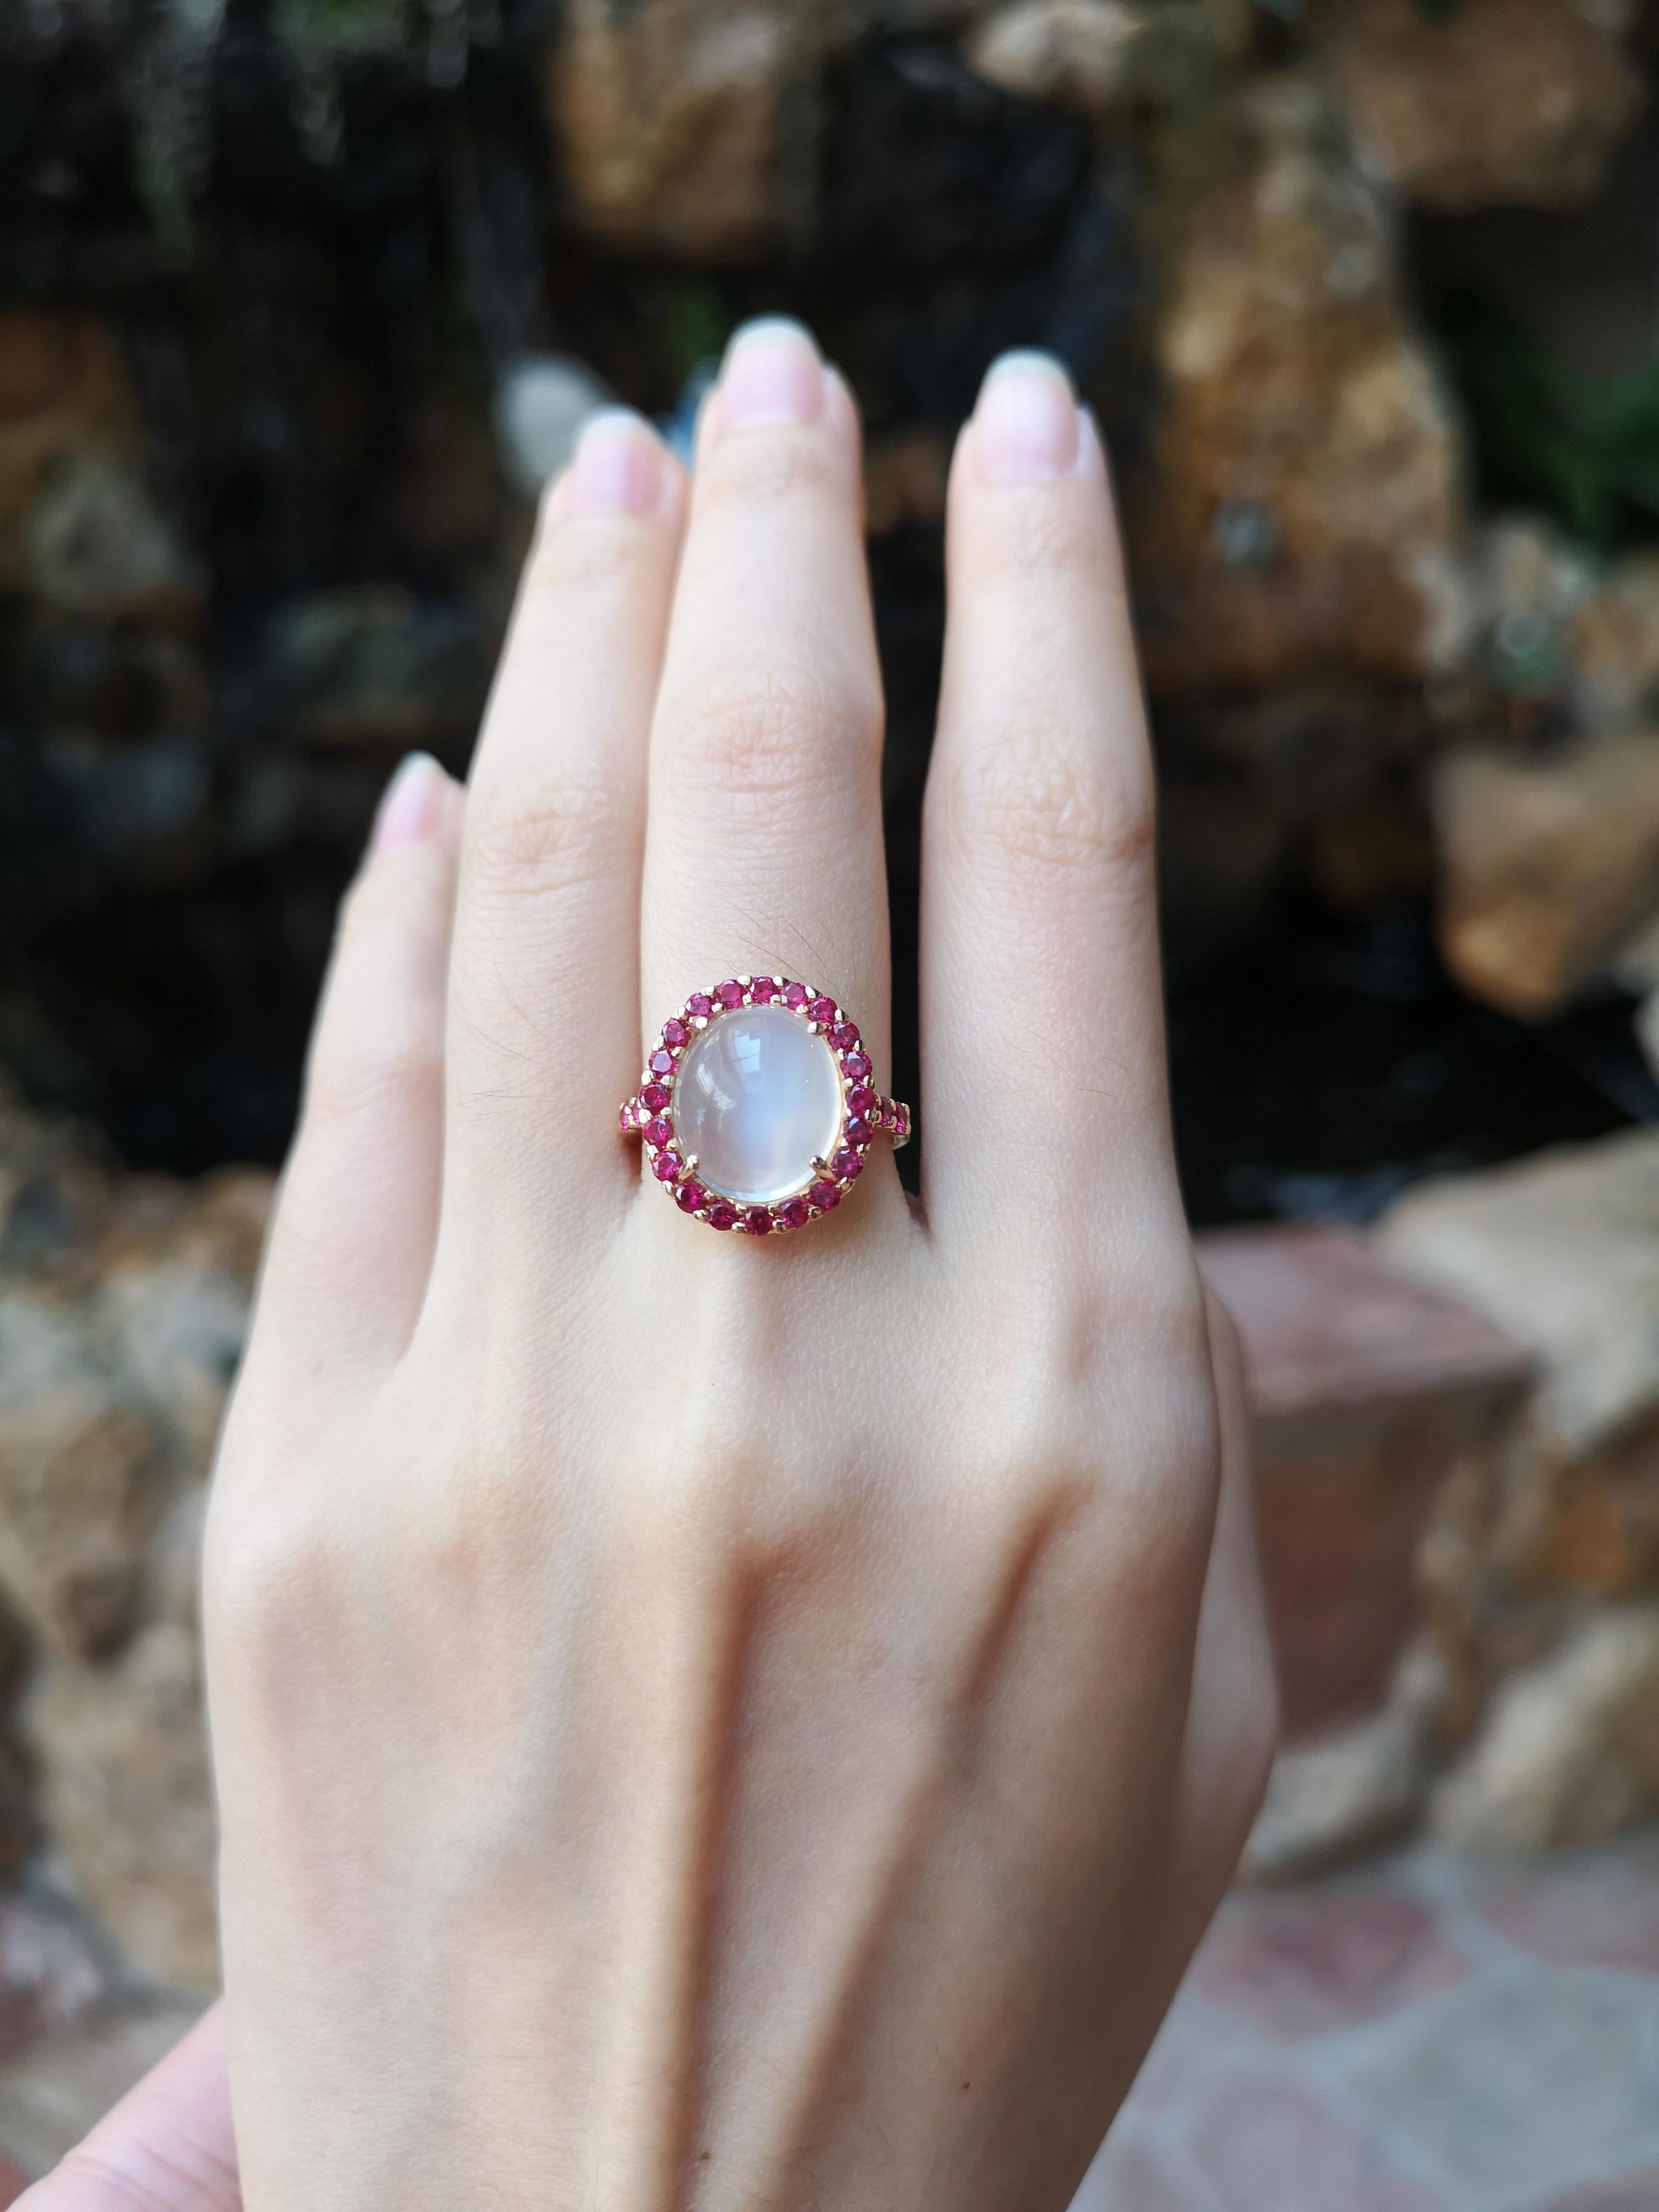 Moonstone 5.31 carats with Ruby 0.76 carat Ring set in 18 Karat Rose Gold Settings 

Width: 1.3 cm
Length: 1.6 cm 
Ring Size: 51

